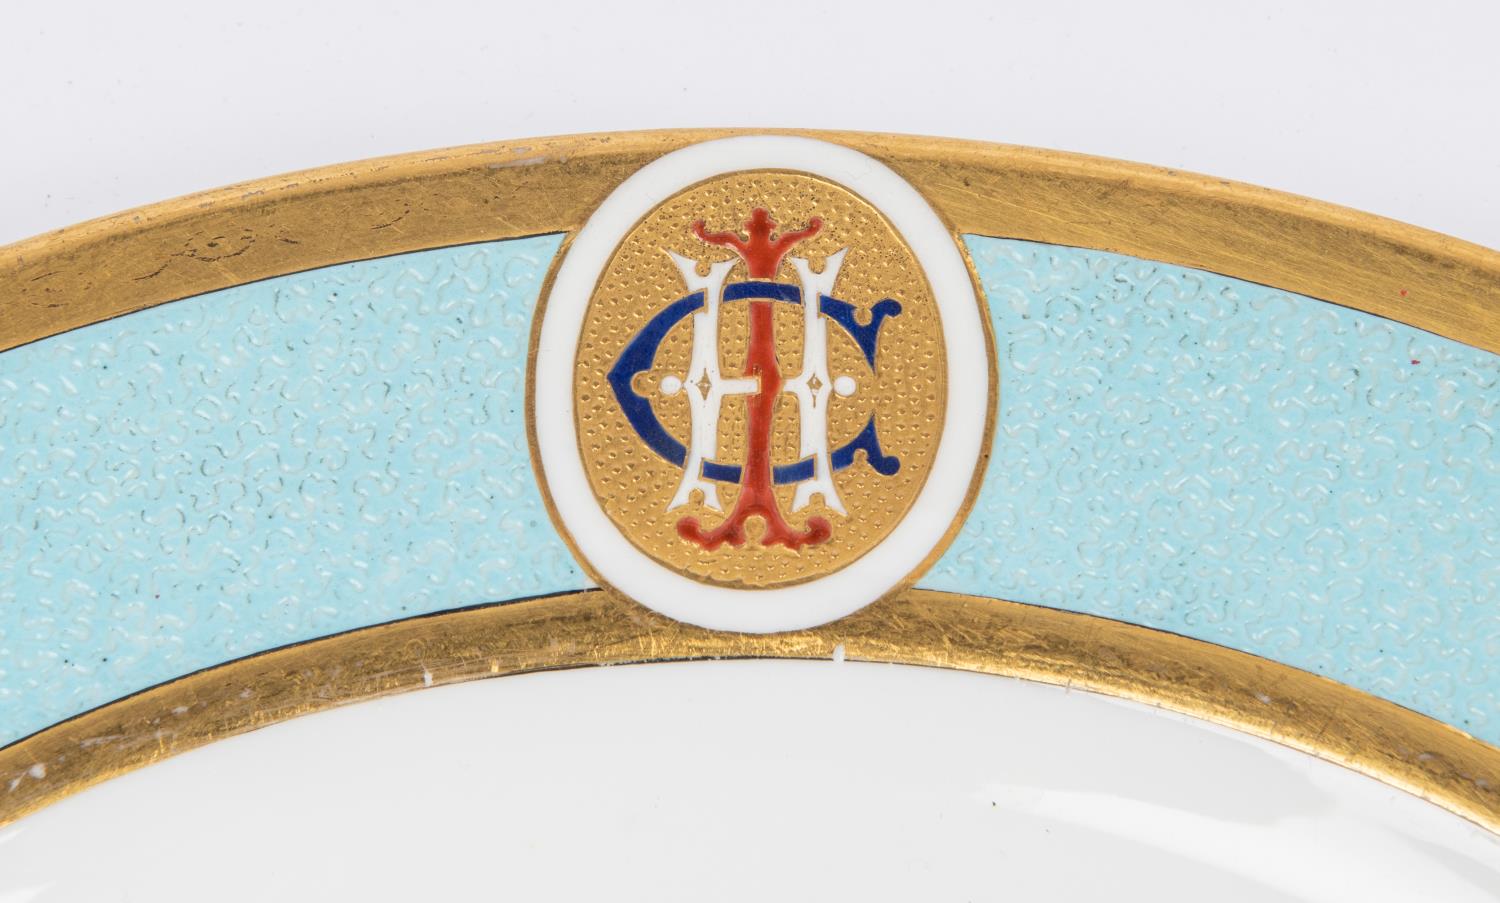 A Victorian mess plate of the 94th Regiment, marked "Cullum and Sharpus Cockspur St", one of the - Image 5 of 6